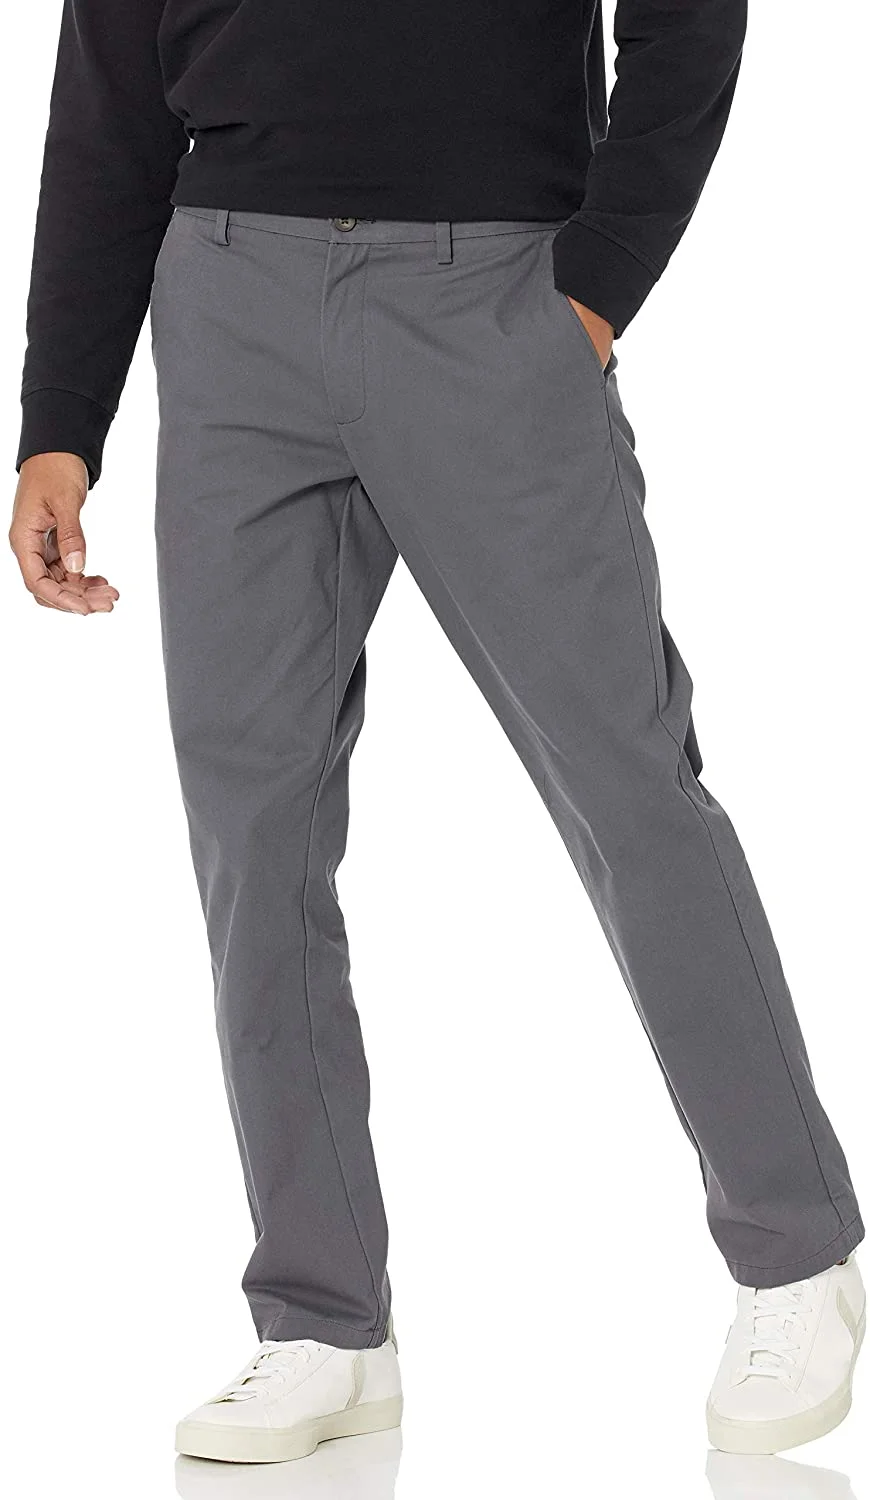 Mens Slim Fit Wrinkle Resistant Flat Front Chino Pant